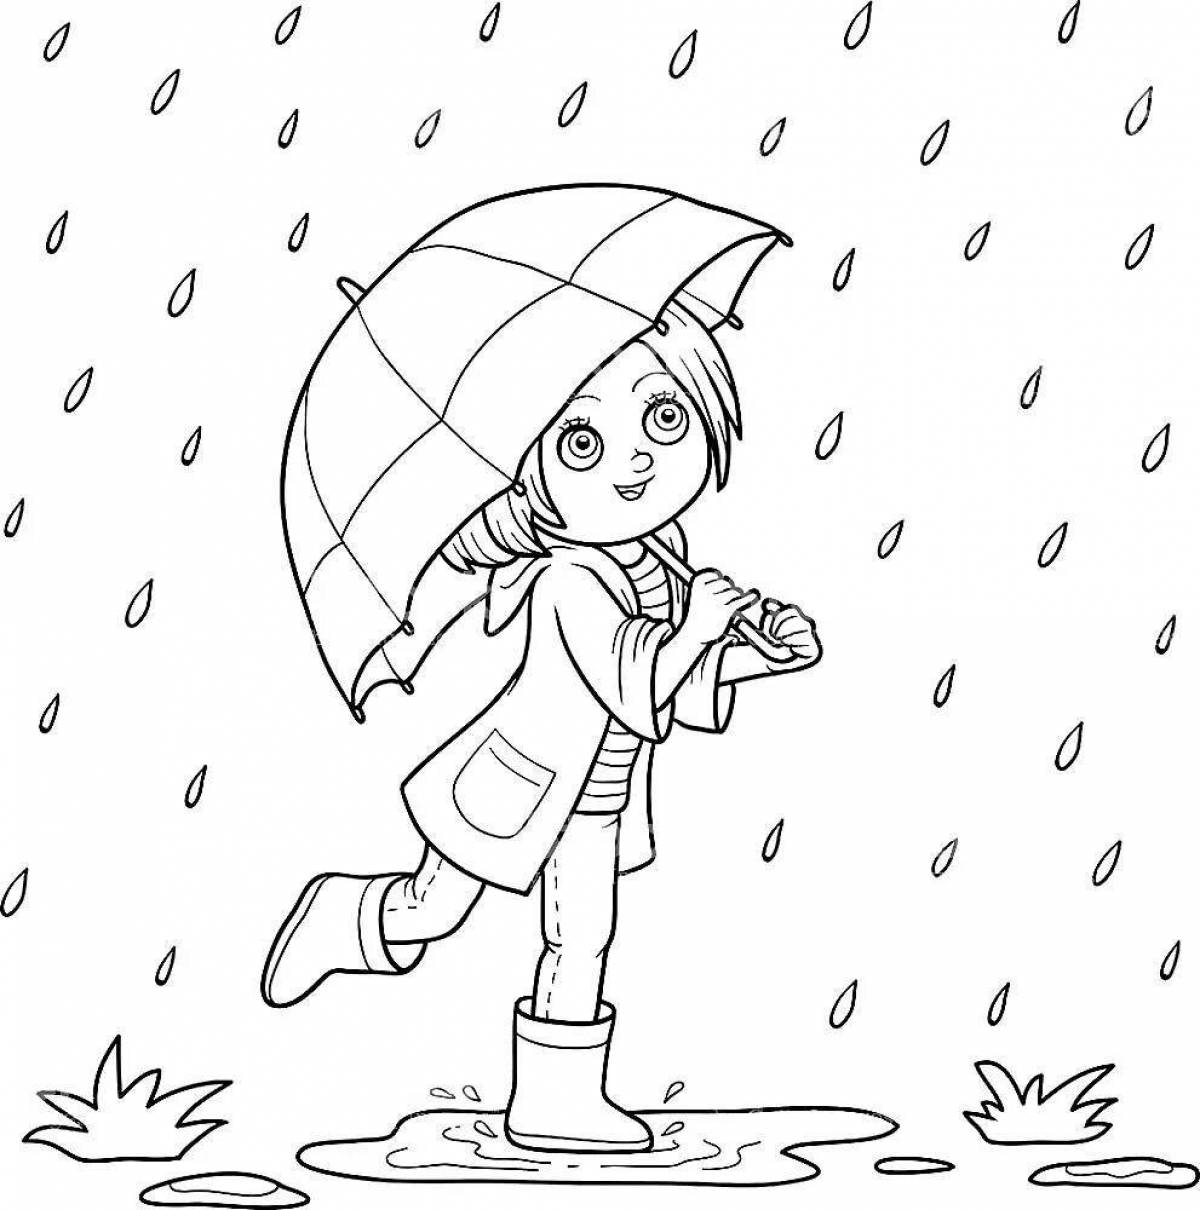 Glorious puddle coloring page